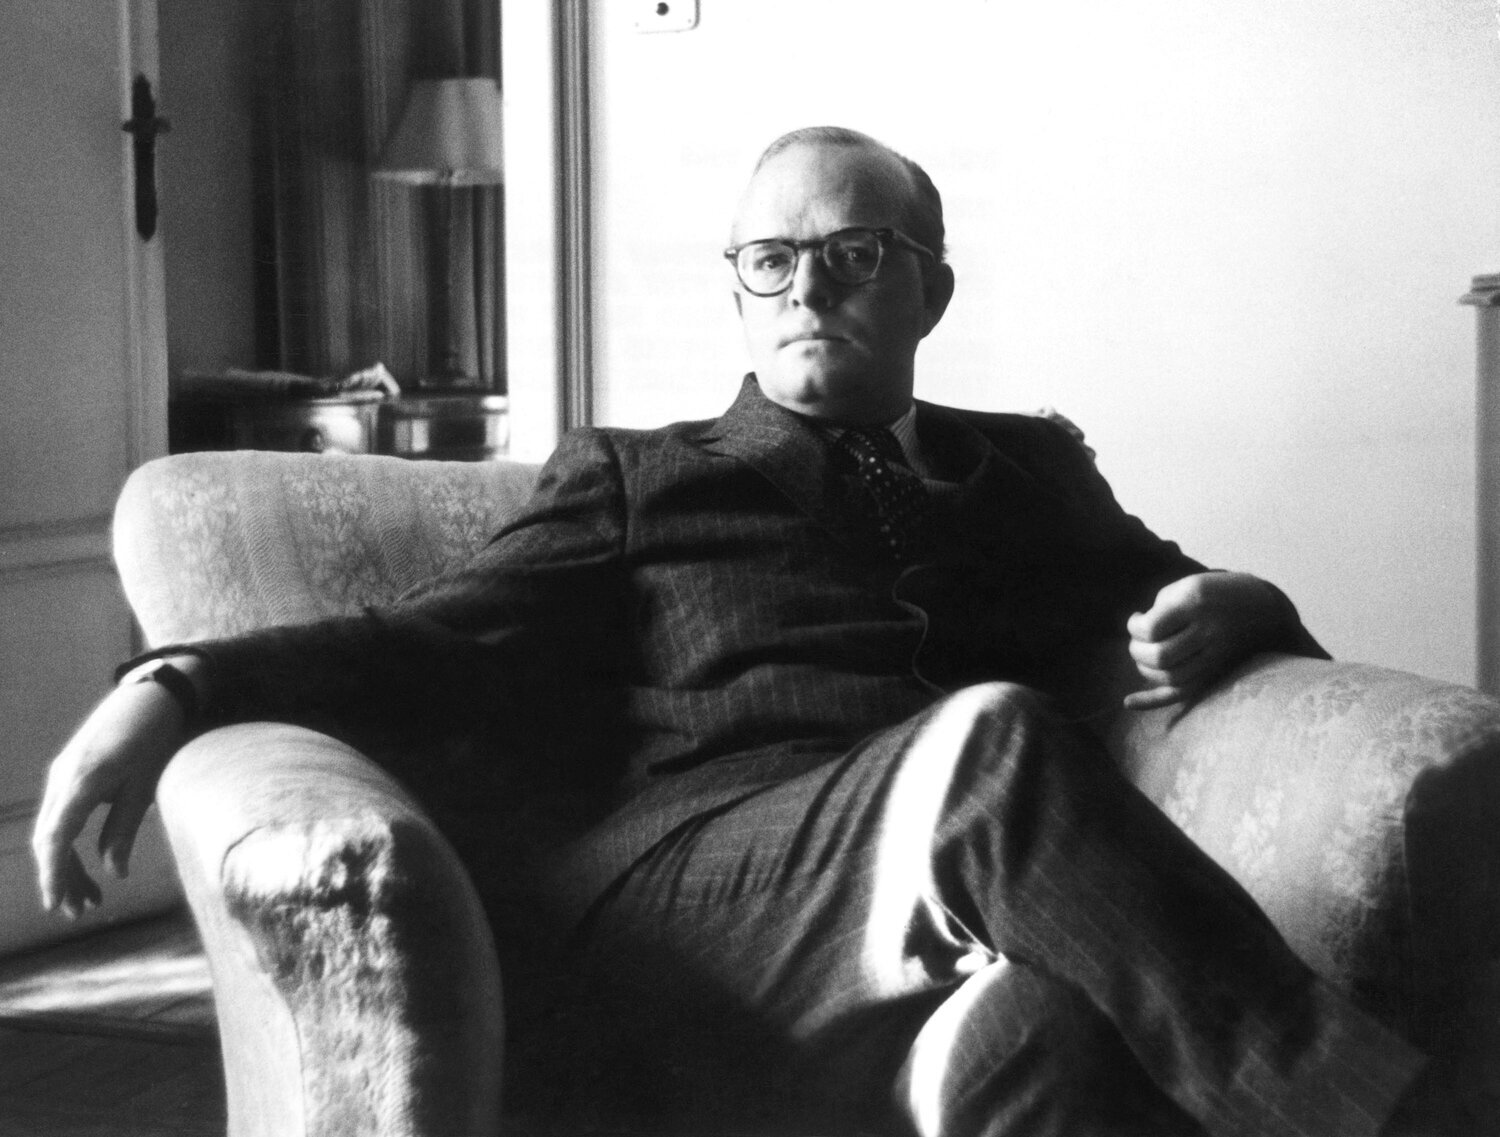 Tuman+Capote.+Courtesy+of+Getty+Images.jpg